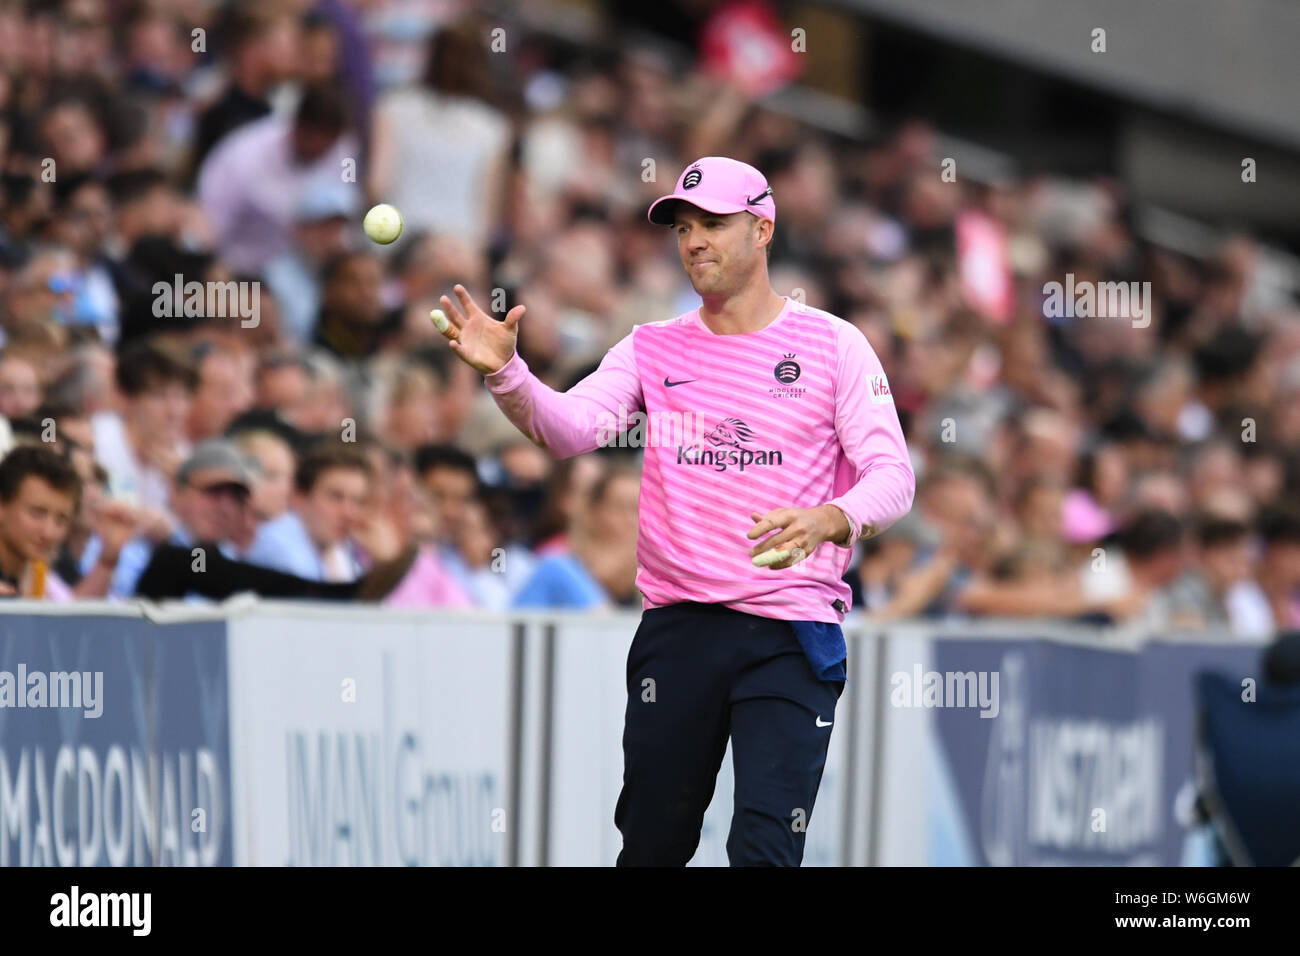 London, UK. 1st Aug, 2019. Daivd Malan (C) of Middlesex during T20 Vitality Blast Fixture between Middesex vs Kent at The Lord Cricket Ground on Thursday, August 01, 2019 in LONDON ENGLAND. Credit: Taka G Wu/Alamy Live News Stock Photo